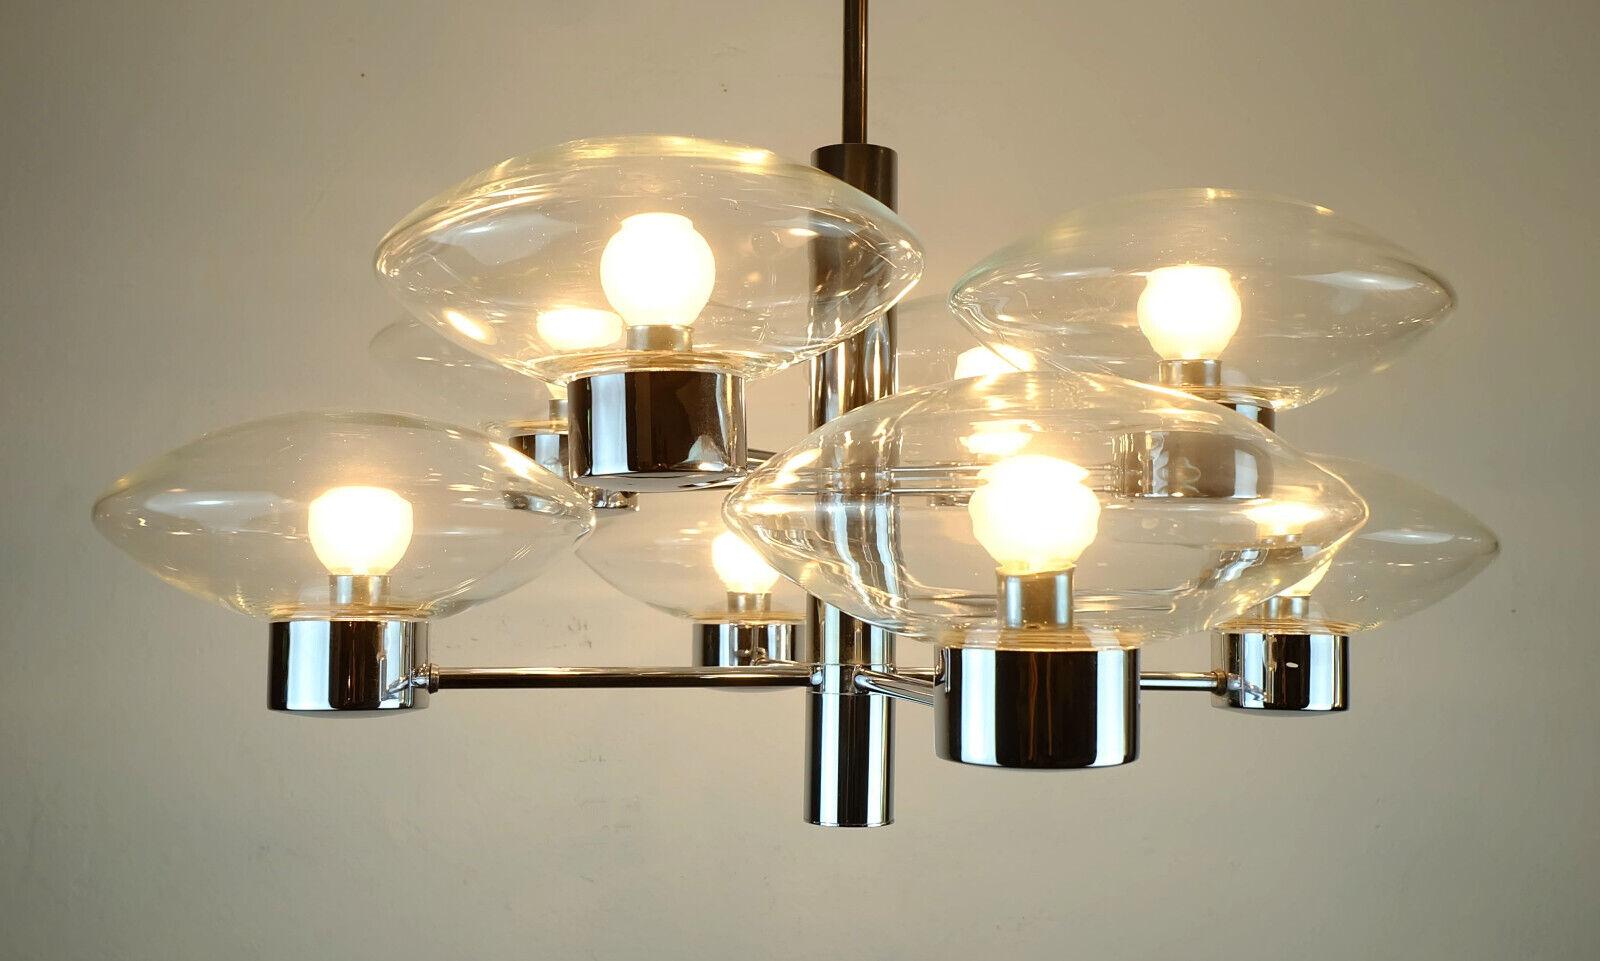 Outstanding 1970s pendant light manufactured by Kaiser-Leuchten. Chrome plated metal, 8 clear glass shades in ufo-shape. Holds E14 bulbs. 
 
Length approx. 37.79